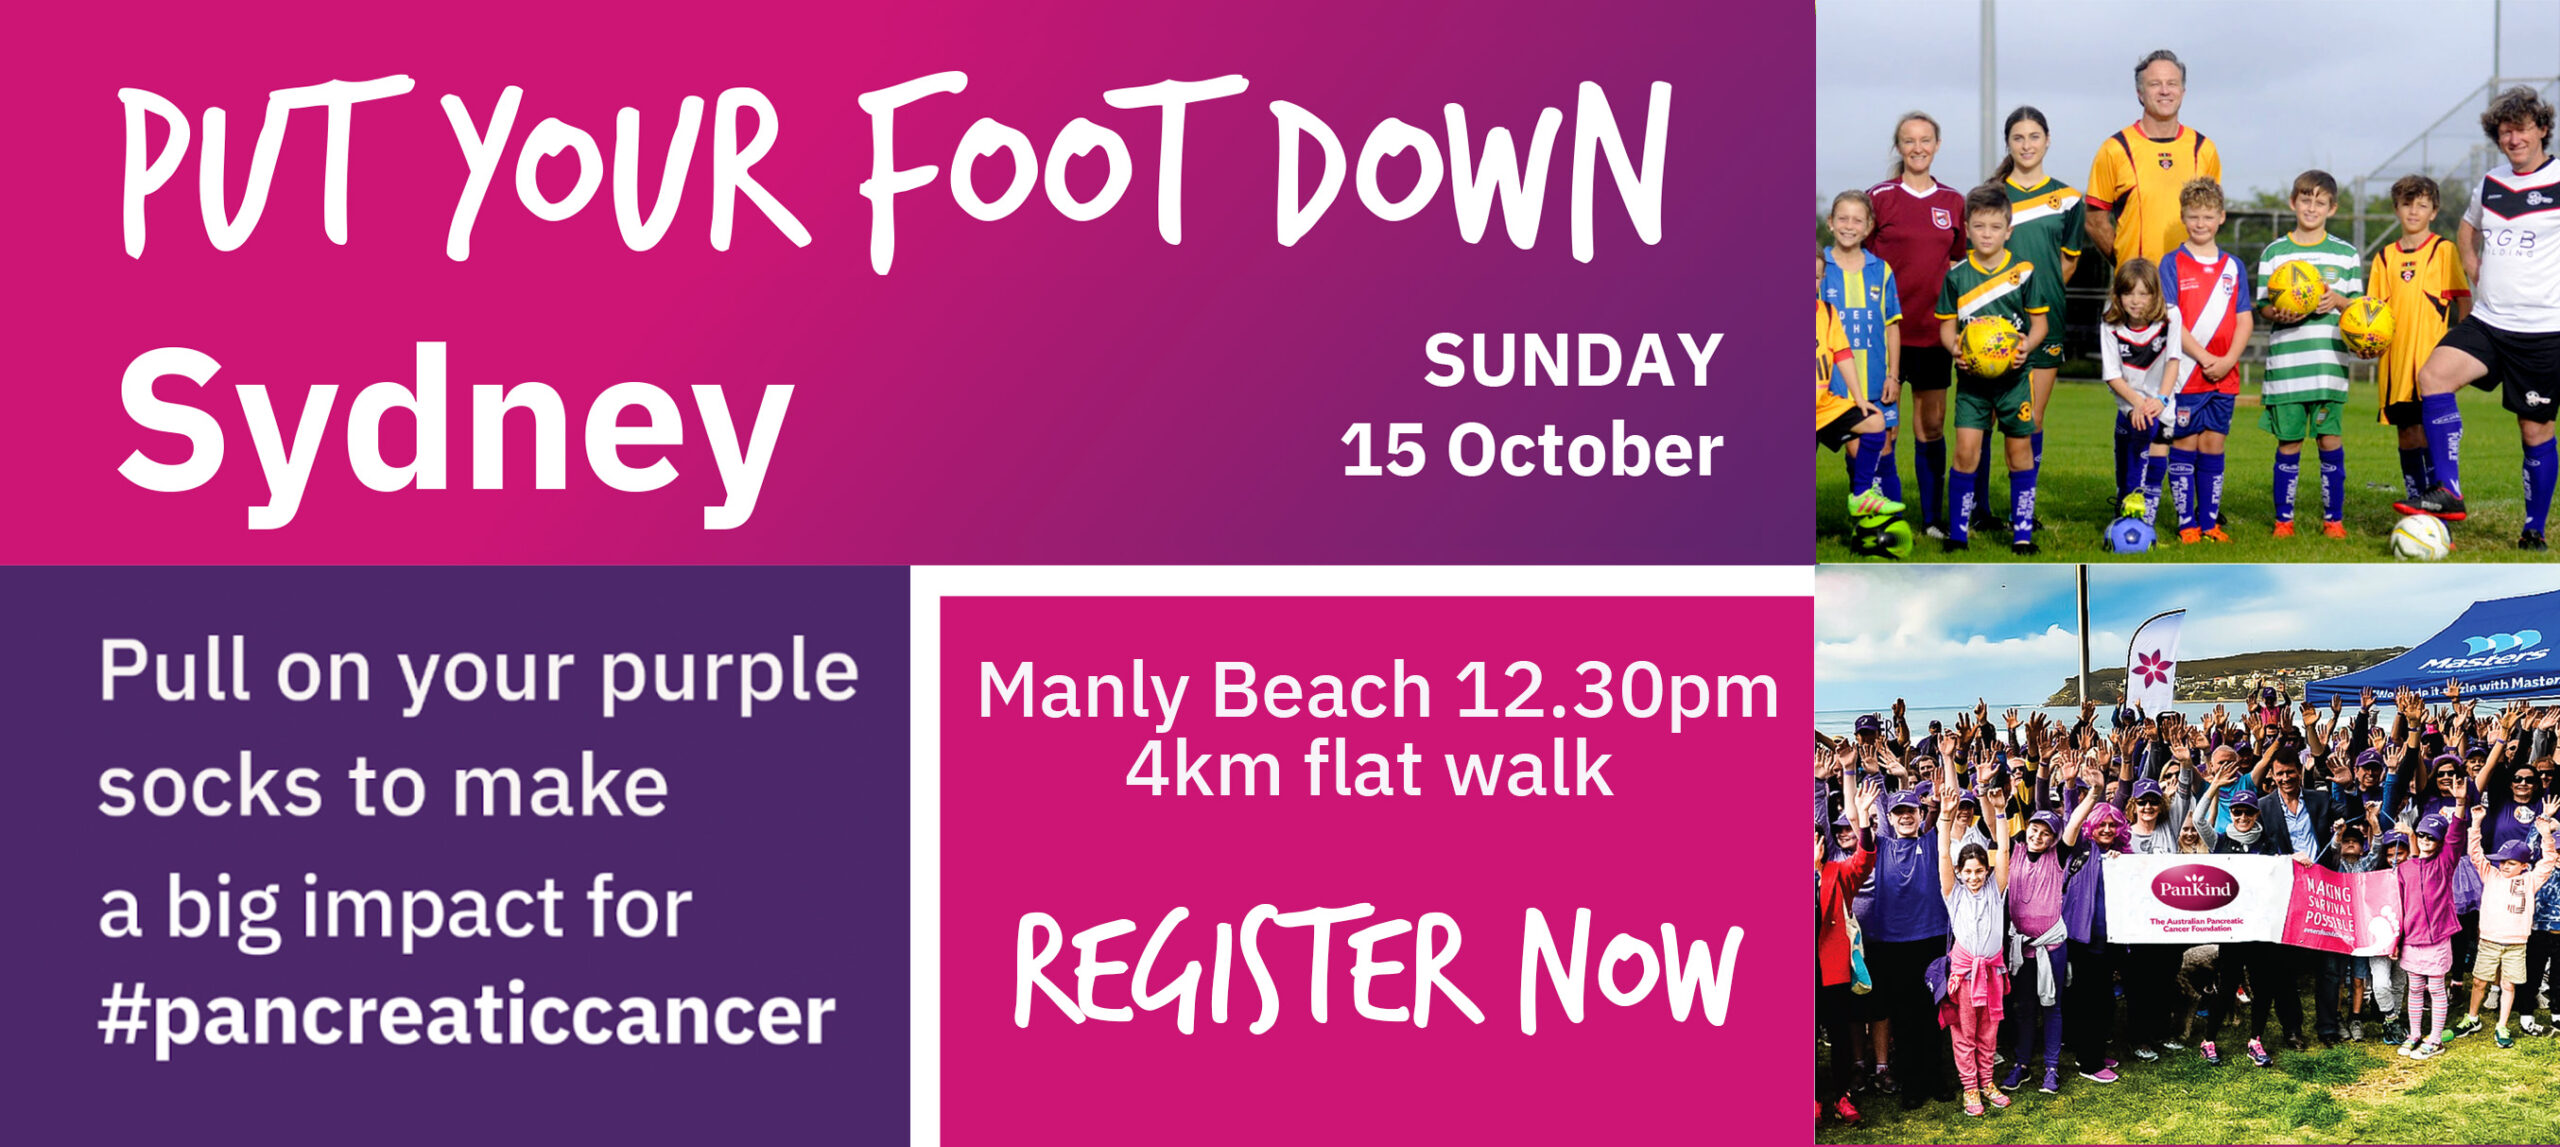 On Sunday 15 October, PanKind is bringing their flagship walk event, Put Your Foot Down, to Manly Beach. With live music and face painting, as well as prizes for best dressed kids and dogs, it’s a great family event with a big heart!